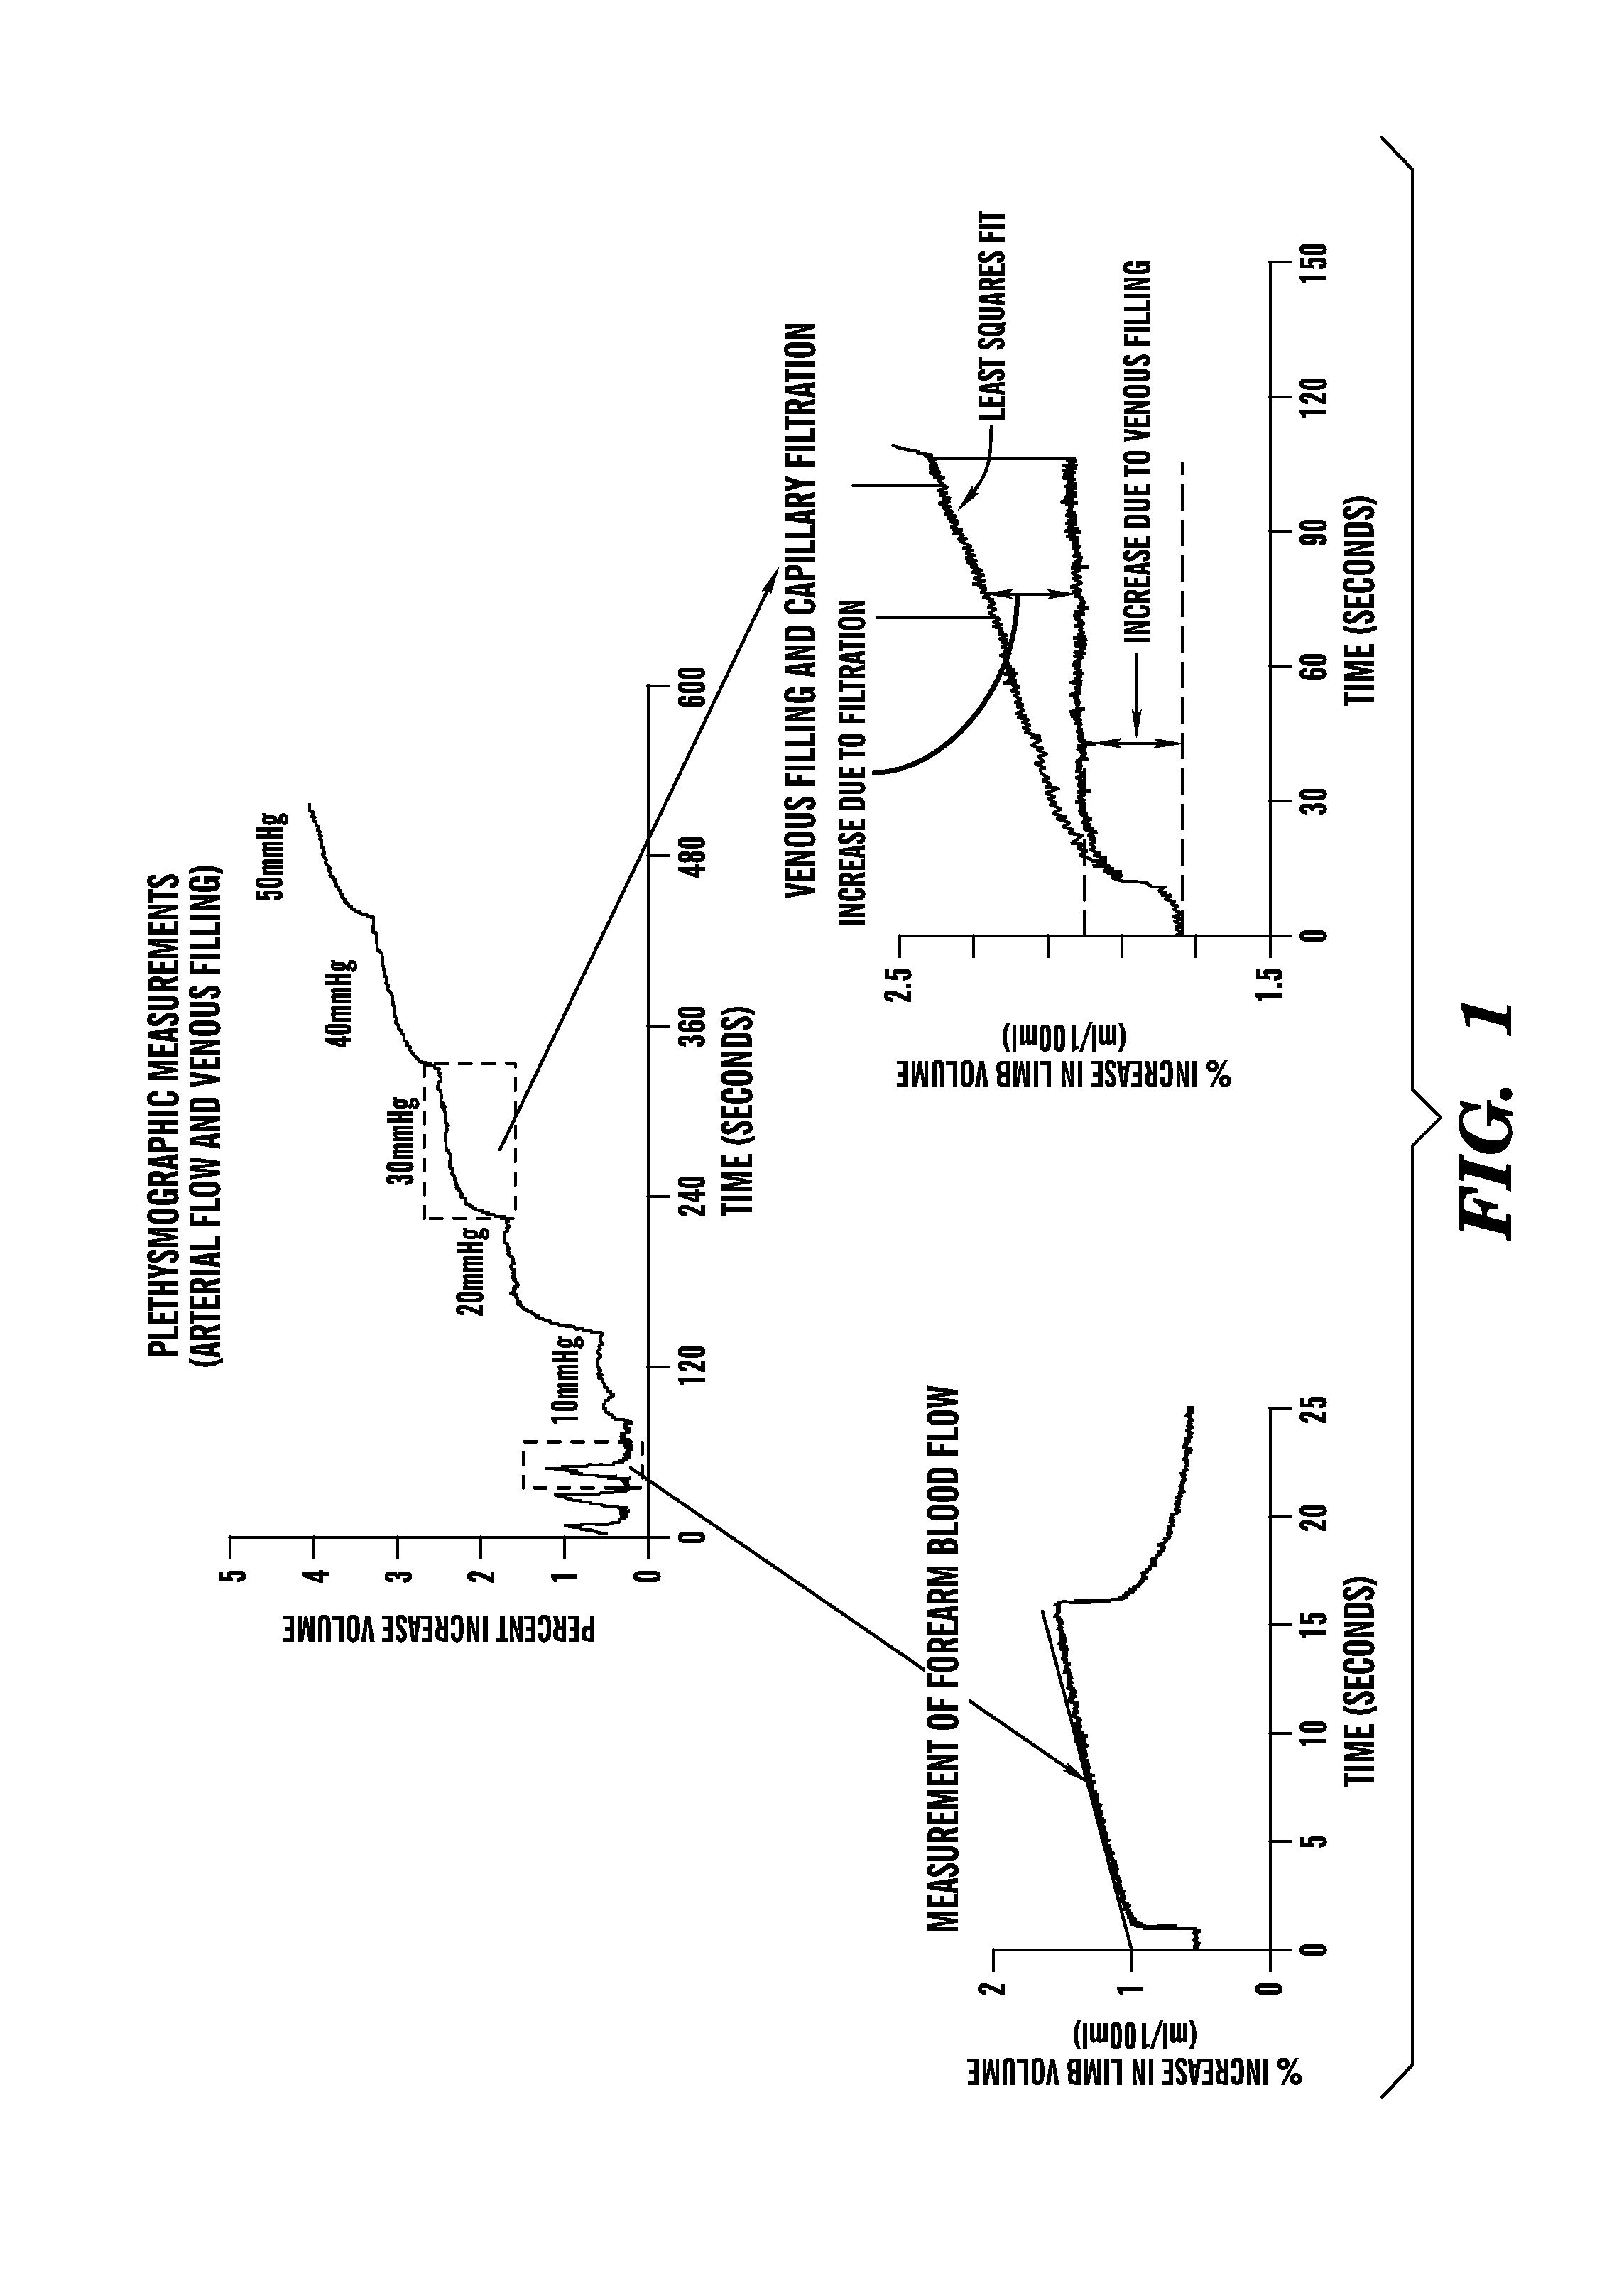 Method for enhancing blood and lymph flow in the extremities